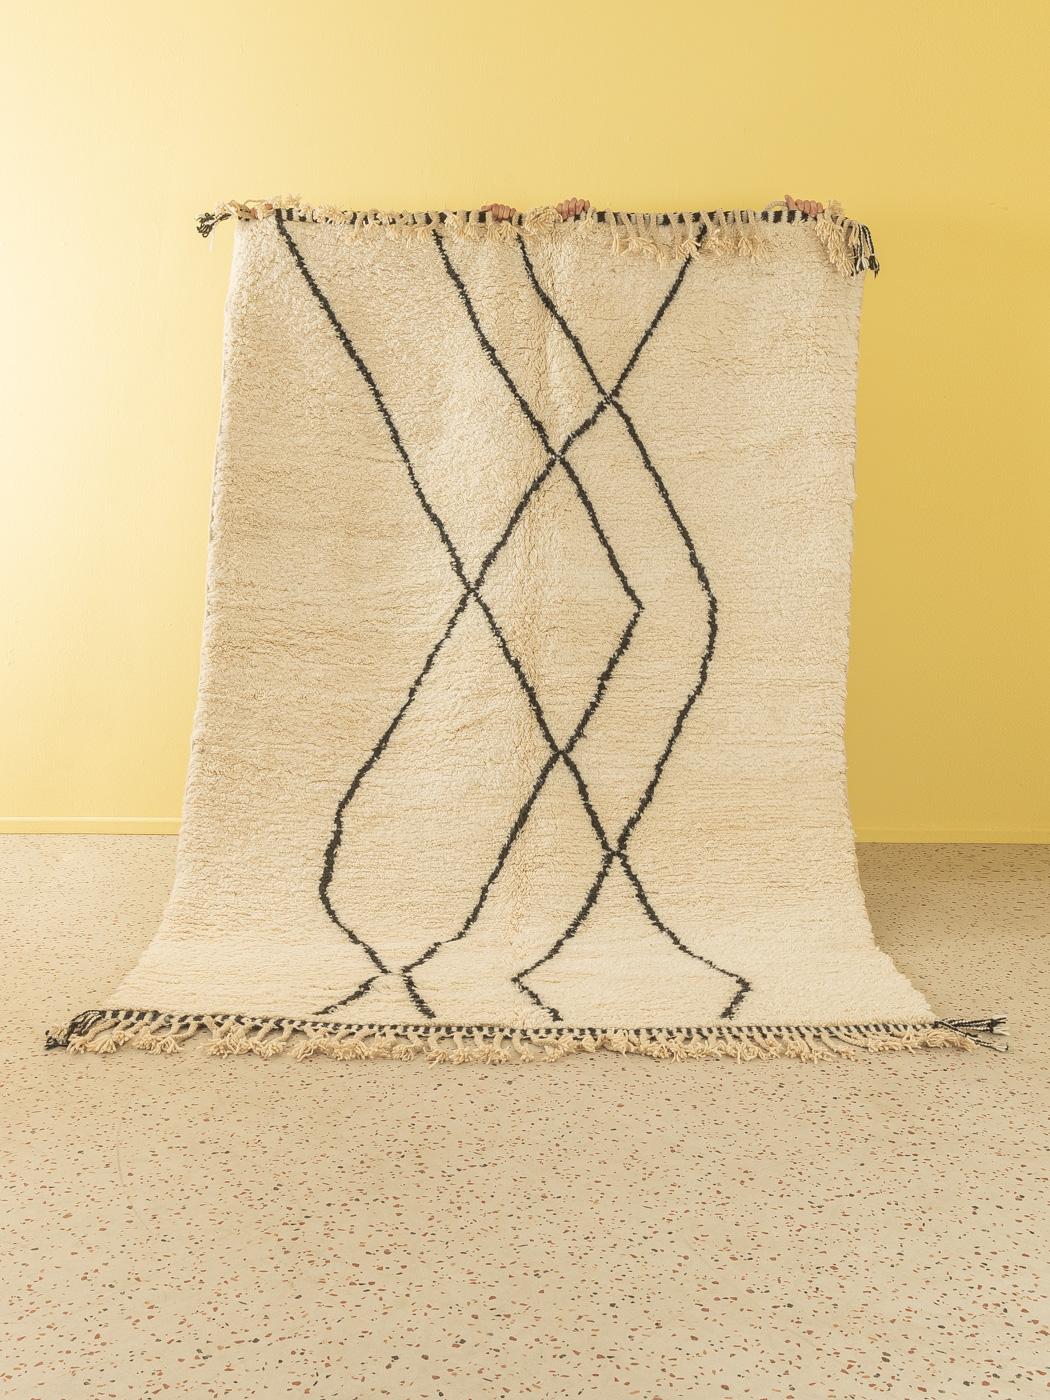 Rivers is a contemporary 100% wool rug – thick and soft, comfortable underfoot. Our Berber rugs are handwoven and handknotted by Amazigh women in the Atlas Mountains. These communities have been crafting rugs for thousands of years. One knot at a